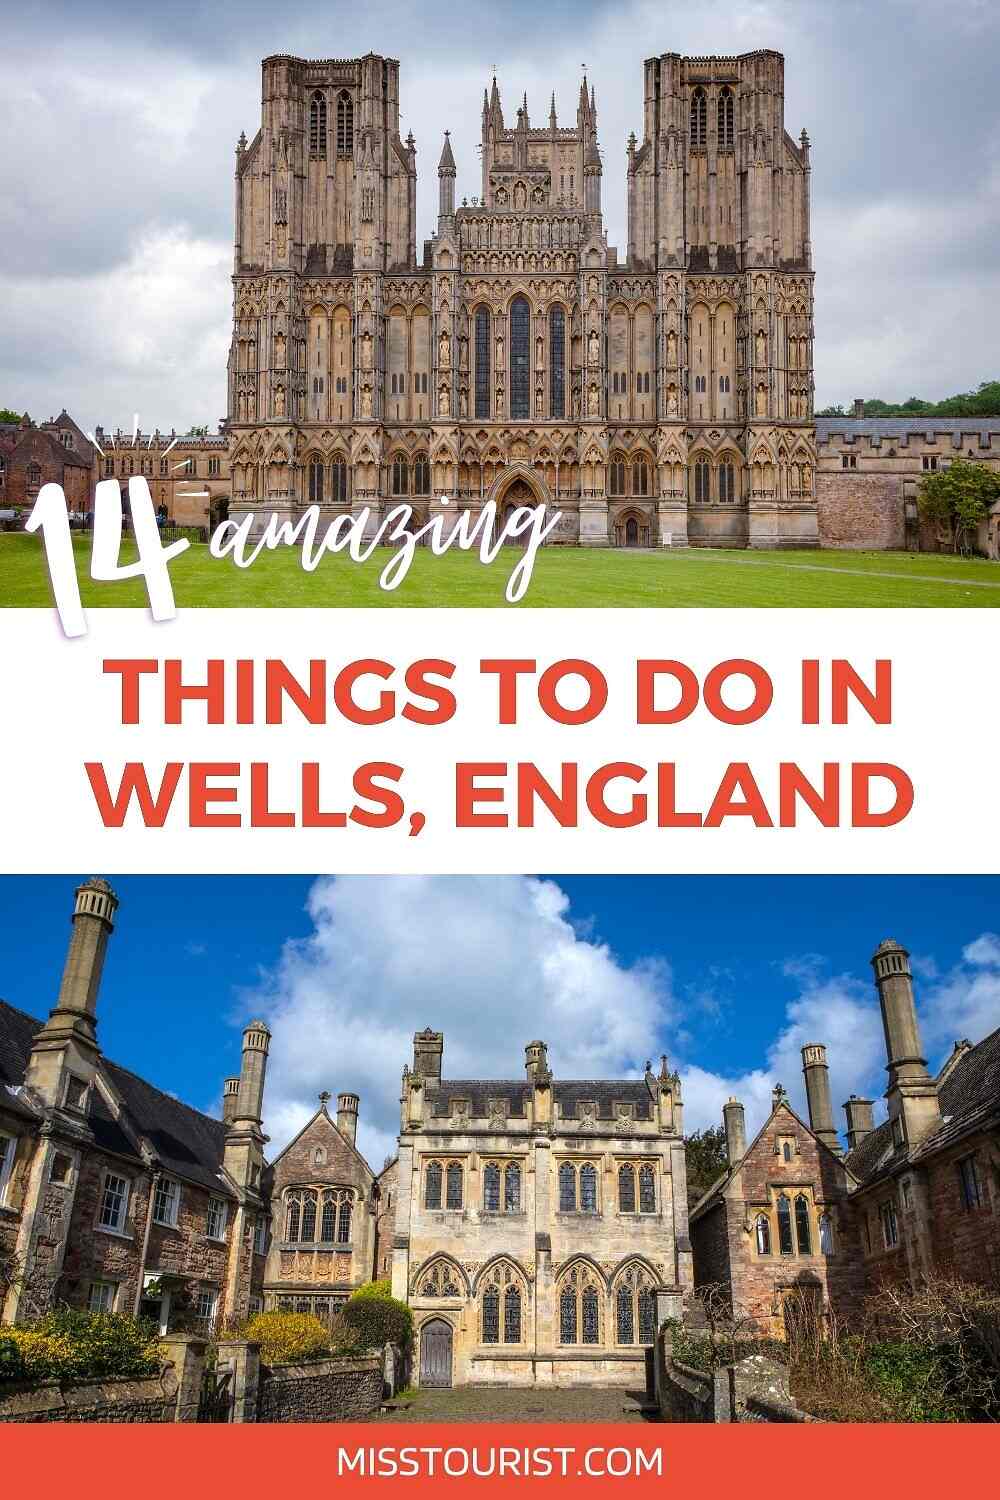 Image showing Wells Cathedral and historic buildings in Wells, England with text overlay: "14 Amazing Things to Do in Wells, England" and the website name "MISSTOURIST.COM" at the bottom.